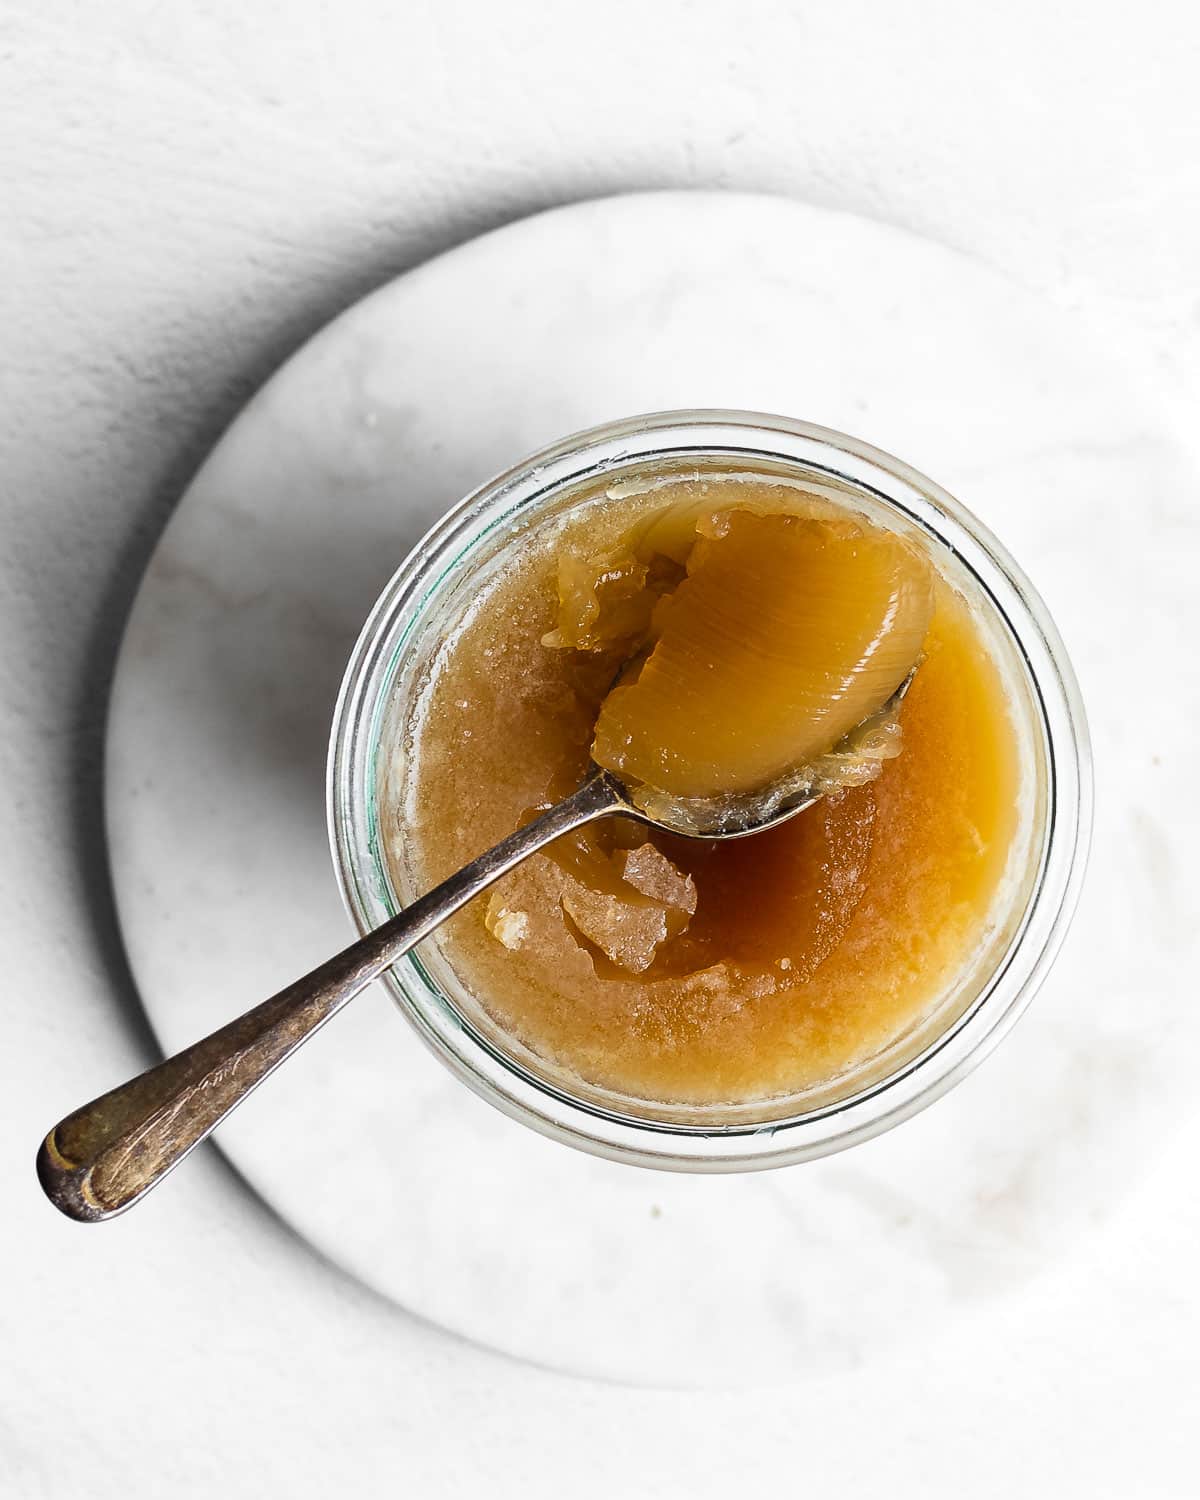 Gelatinous chicken bone bone broth in a glass jar with a spoon on a white background.